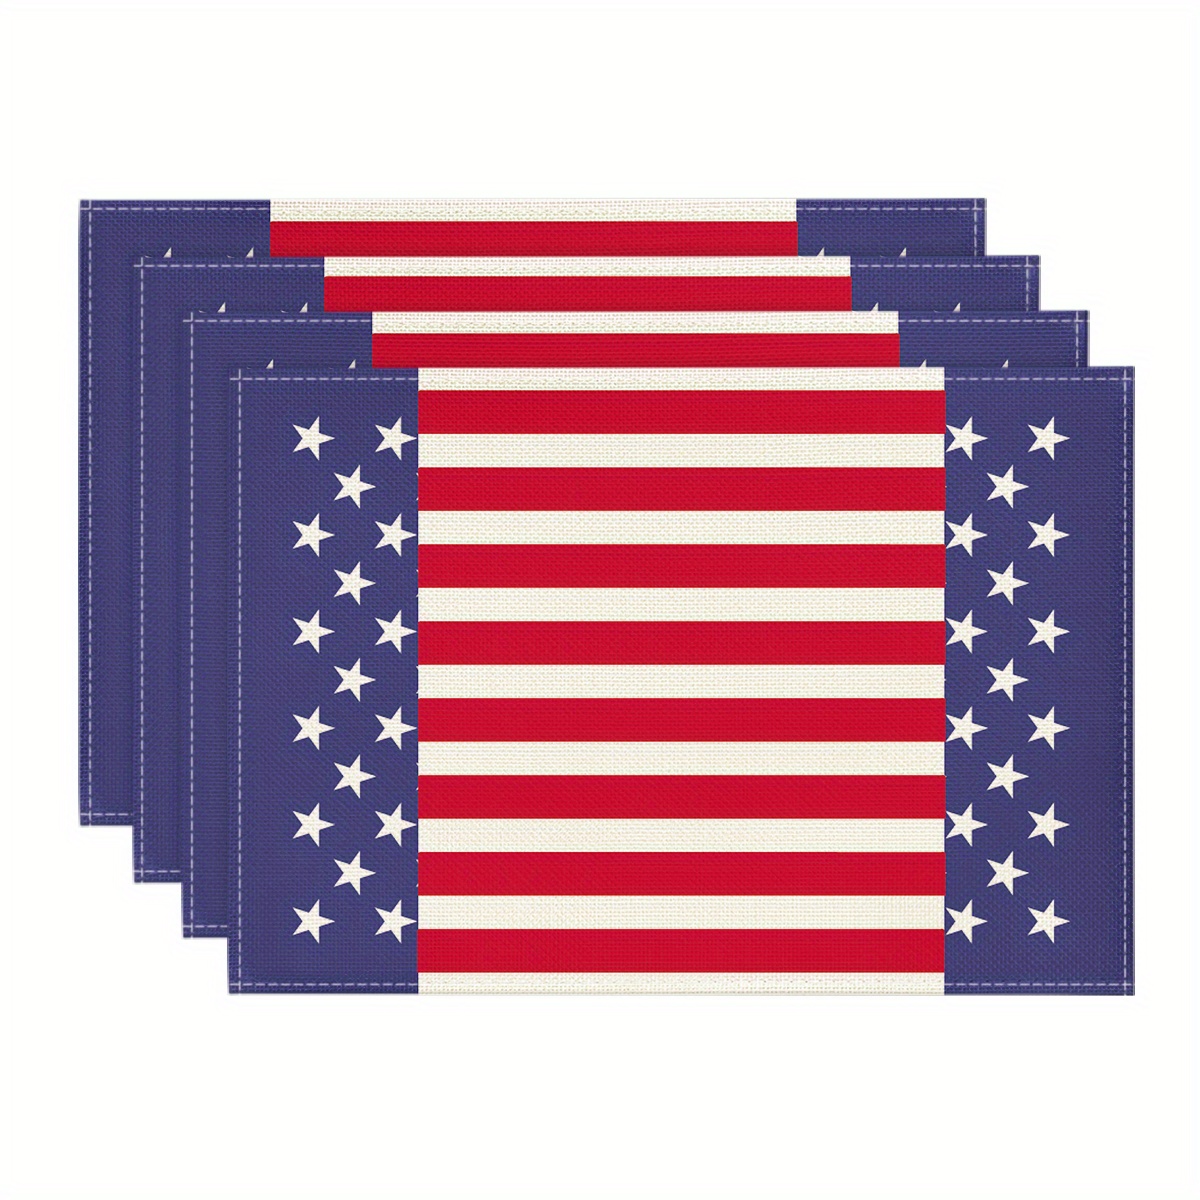 

Sm:)e Stripes And Stars 4th Of July Memorial Day Placemats For Dining Table, 12 X 18 Inch Patriotic Seasonal Holiday Decoration Rustic Vintage Washable Table Mats Set Of 4